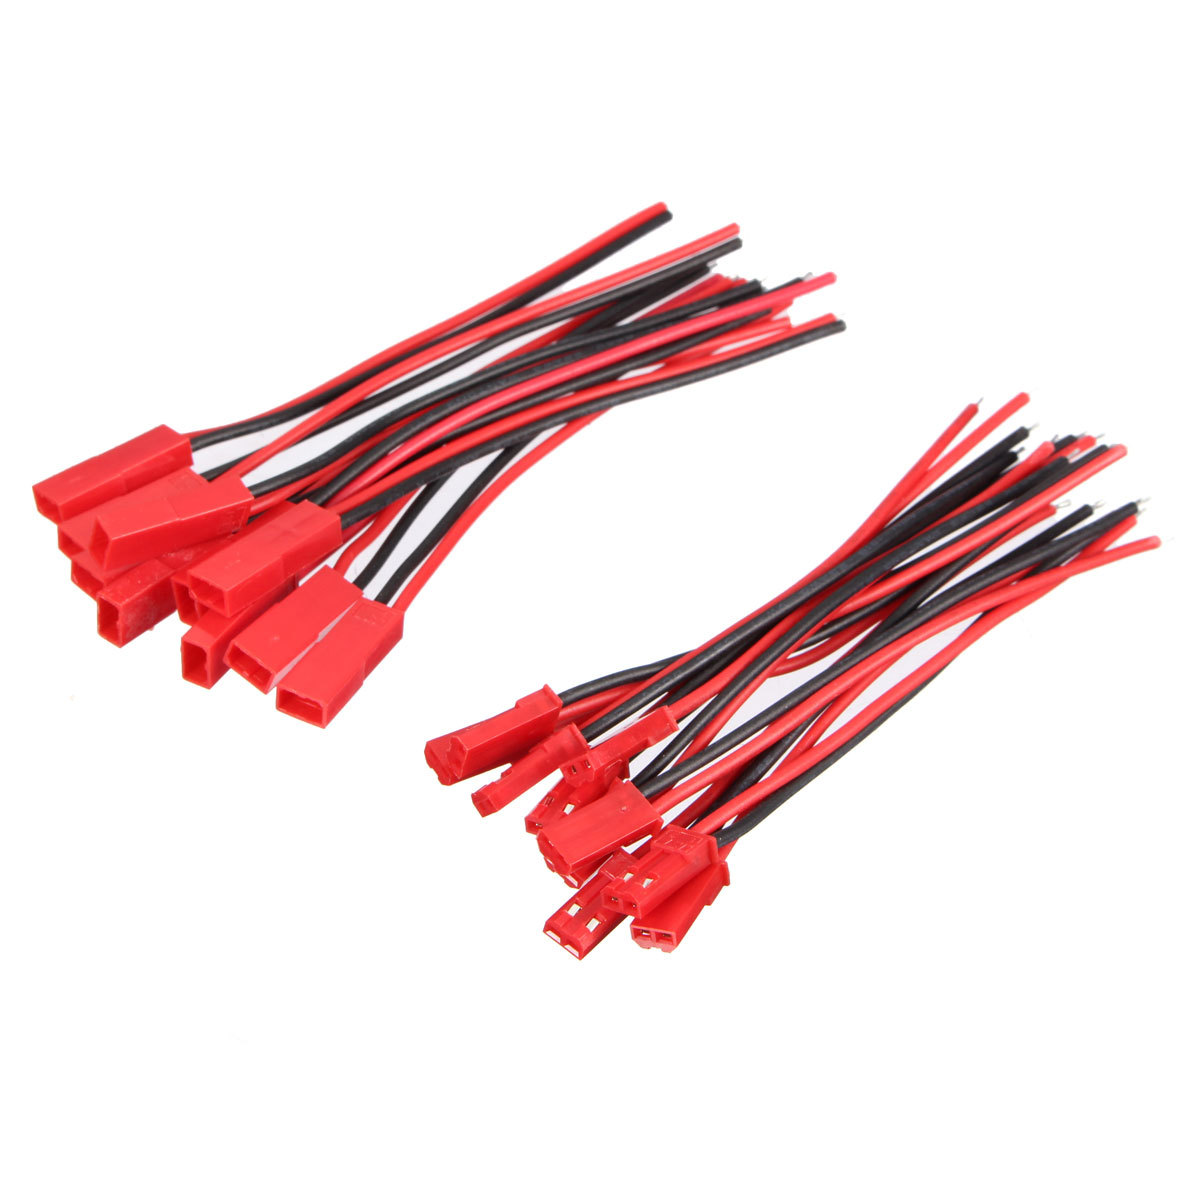 Excellway?® 10 Pairs 2 Pins JST Male & Female Connectors Plug Cable Wire Line 110mm Red 2